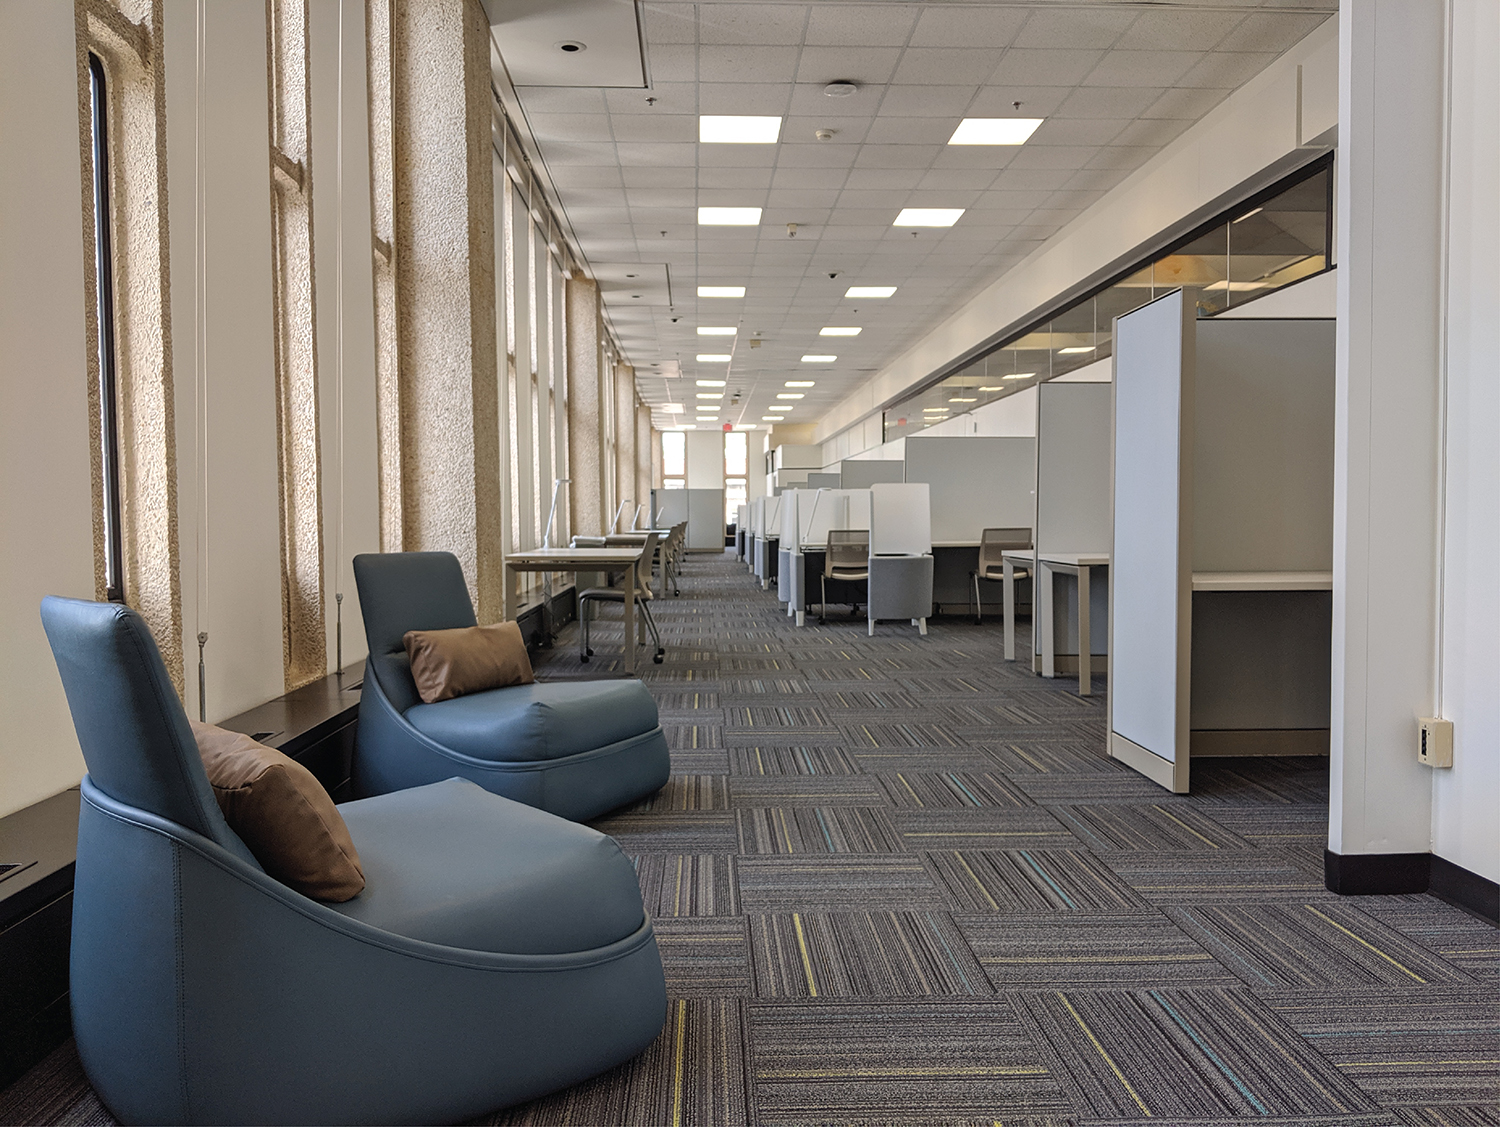 Graduate Study Room with a variety of seating options including open tables, carrels and lounge seating